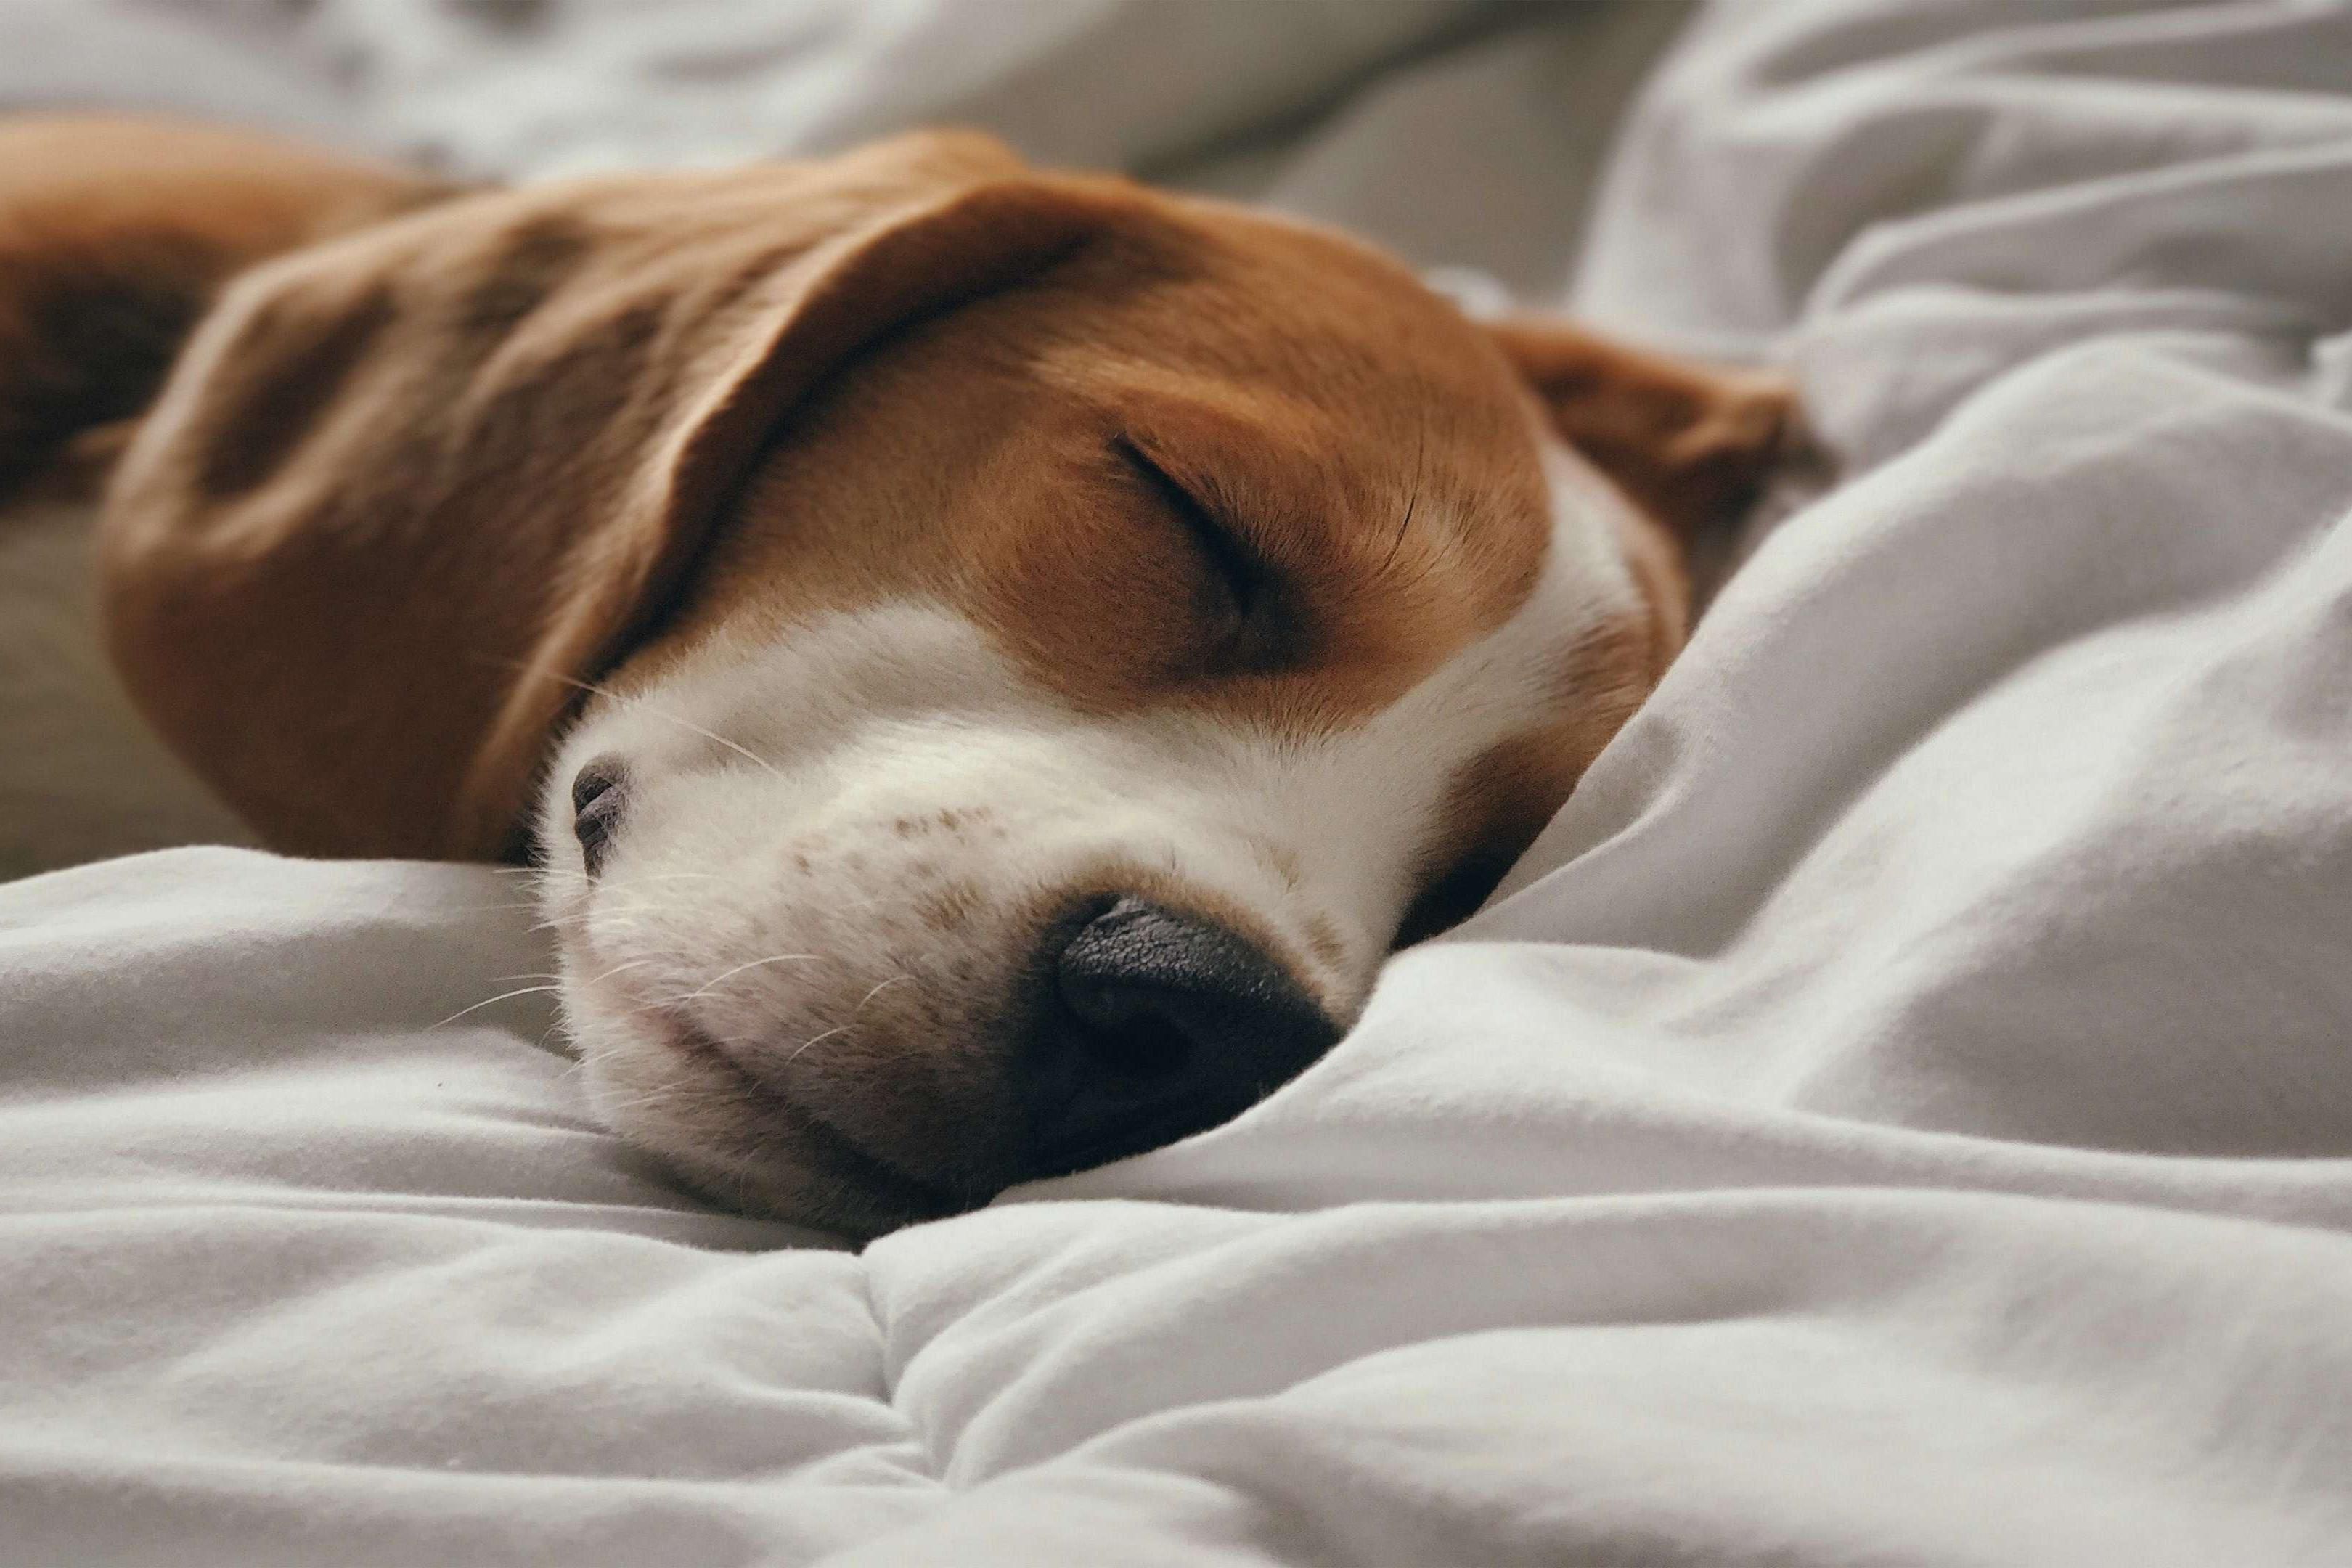 It's easy to bring your pet along when you stay with us. Just book online, then call the hotel directly to give them your reservation confirmation number and ask them to add your pet to the reservation. A $25 non refundable pet fee applies per pet, maxing at $150. For more info please contact the hotel directly. 